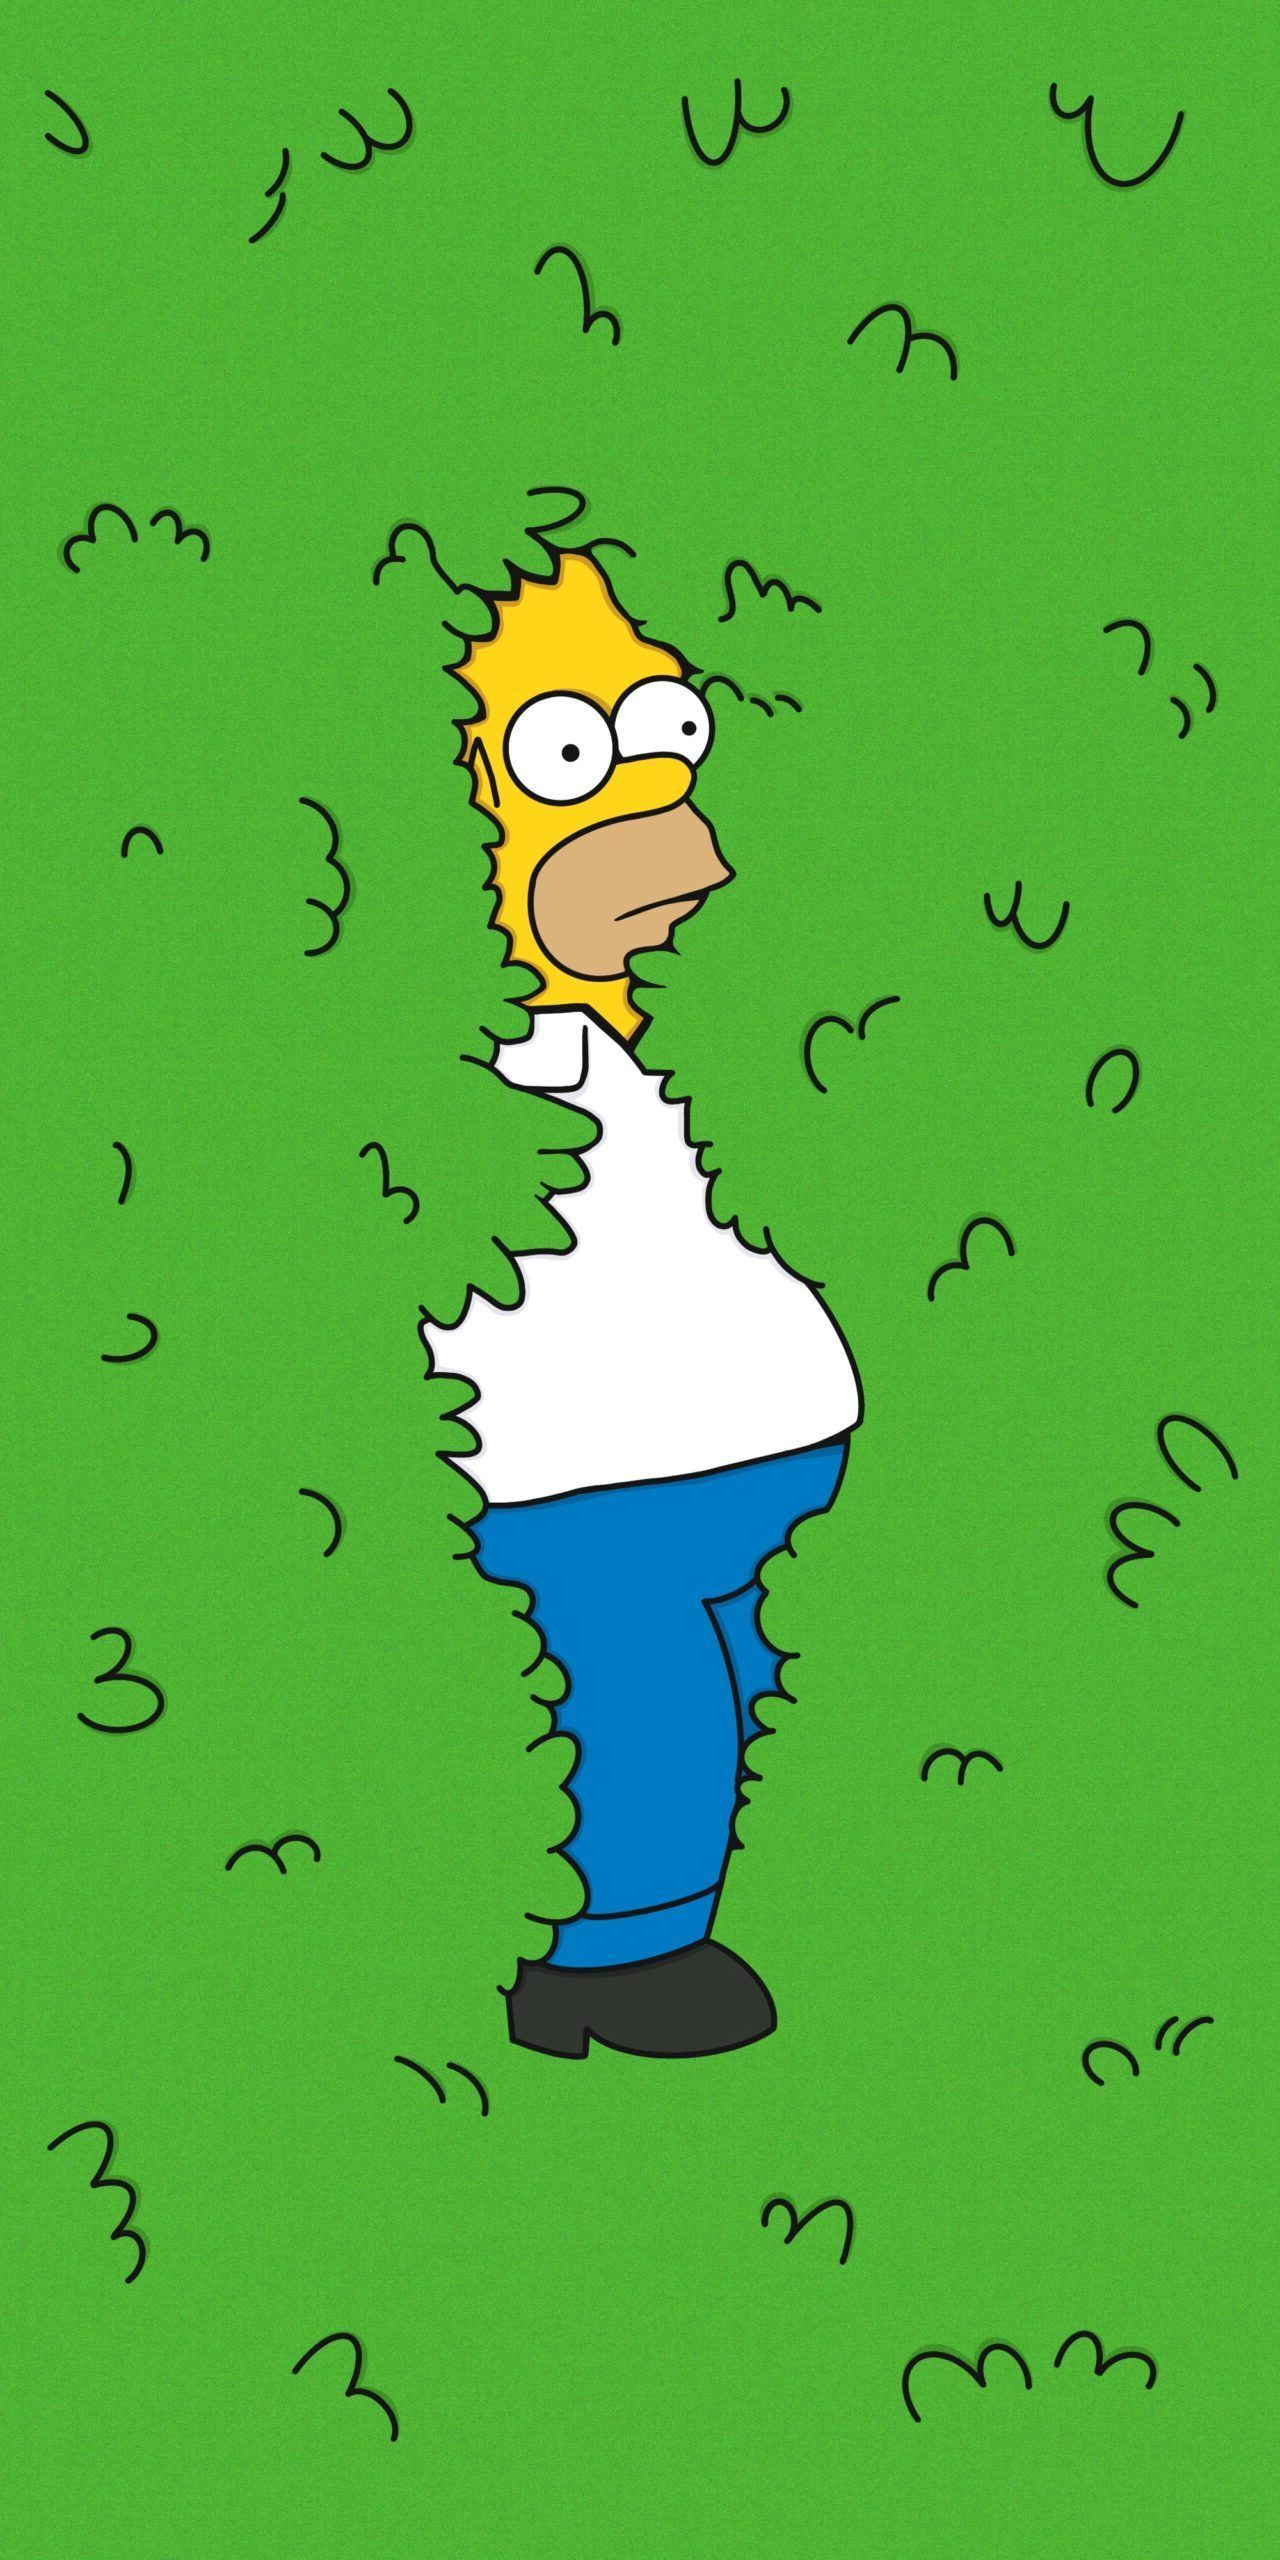 IPhone wallpaper of Homer Simpson from The Simpsons with a green background - The Simpsons, Homer Simpson